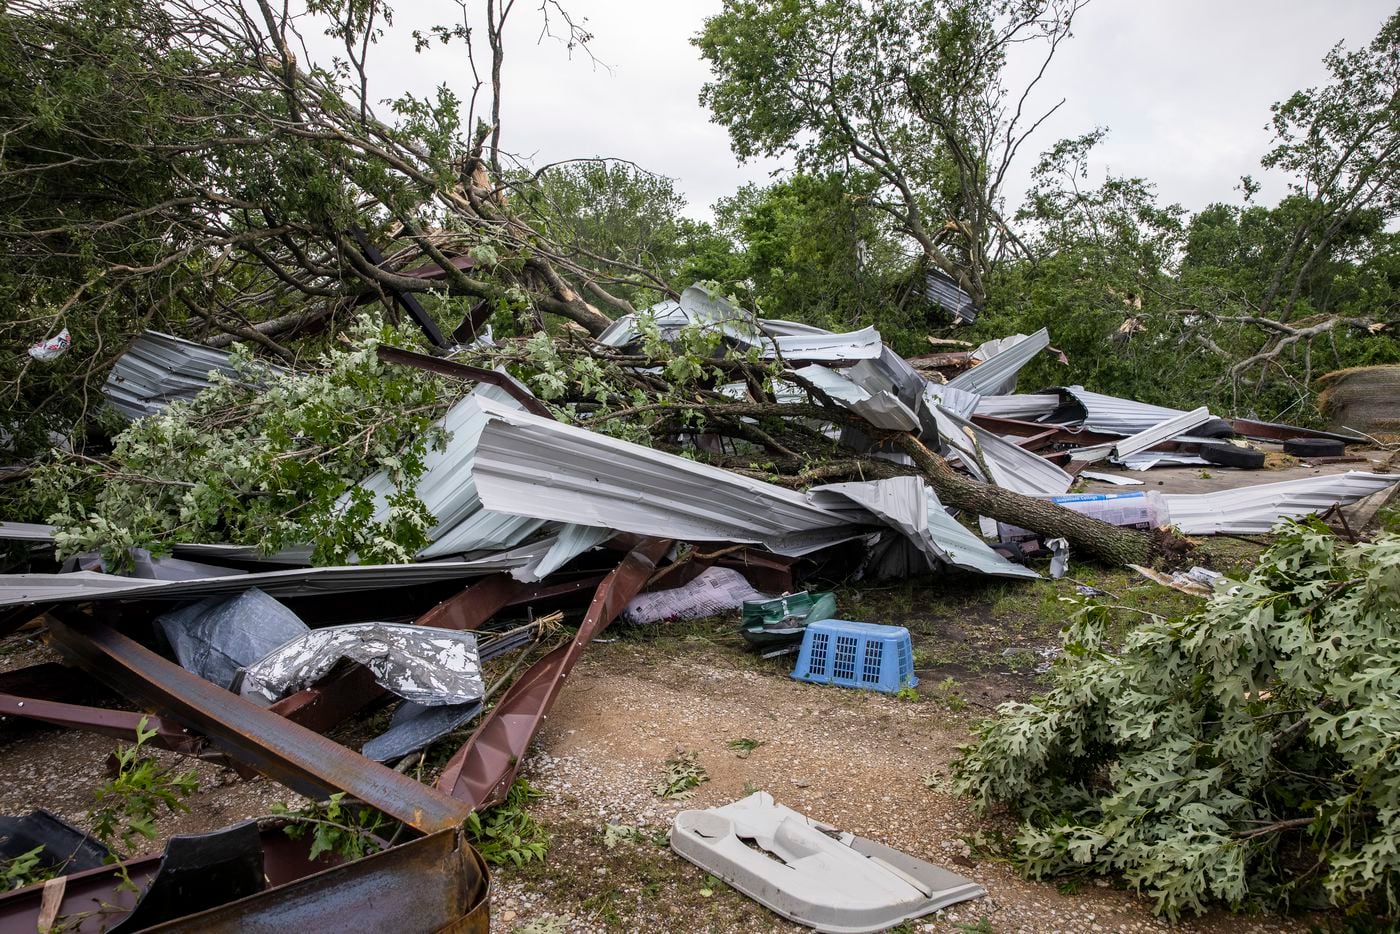 The detritus of an auto parts shop landed across the road in a neighbor’s property in the aftermath of a Monday night tornado that touched down just south of Waxahachie, Texas, on Tuesday, May 4, 2021. (Lynda M. González/The Dallas Morning News)